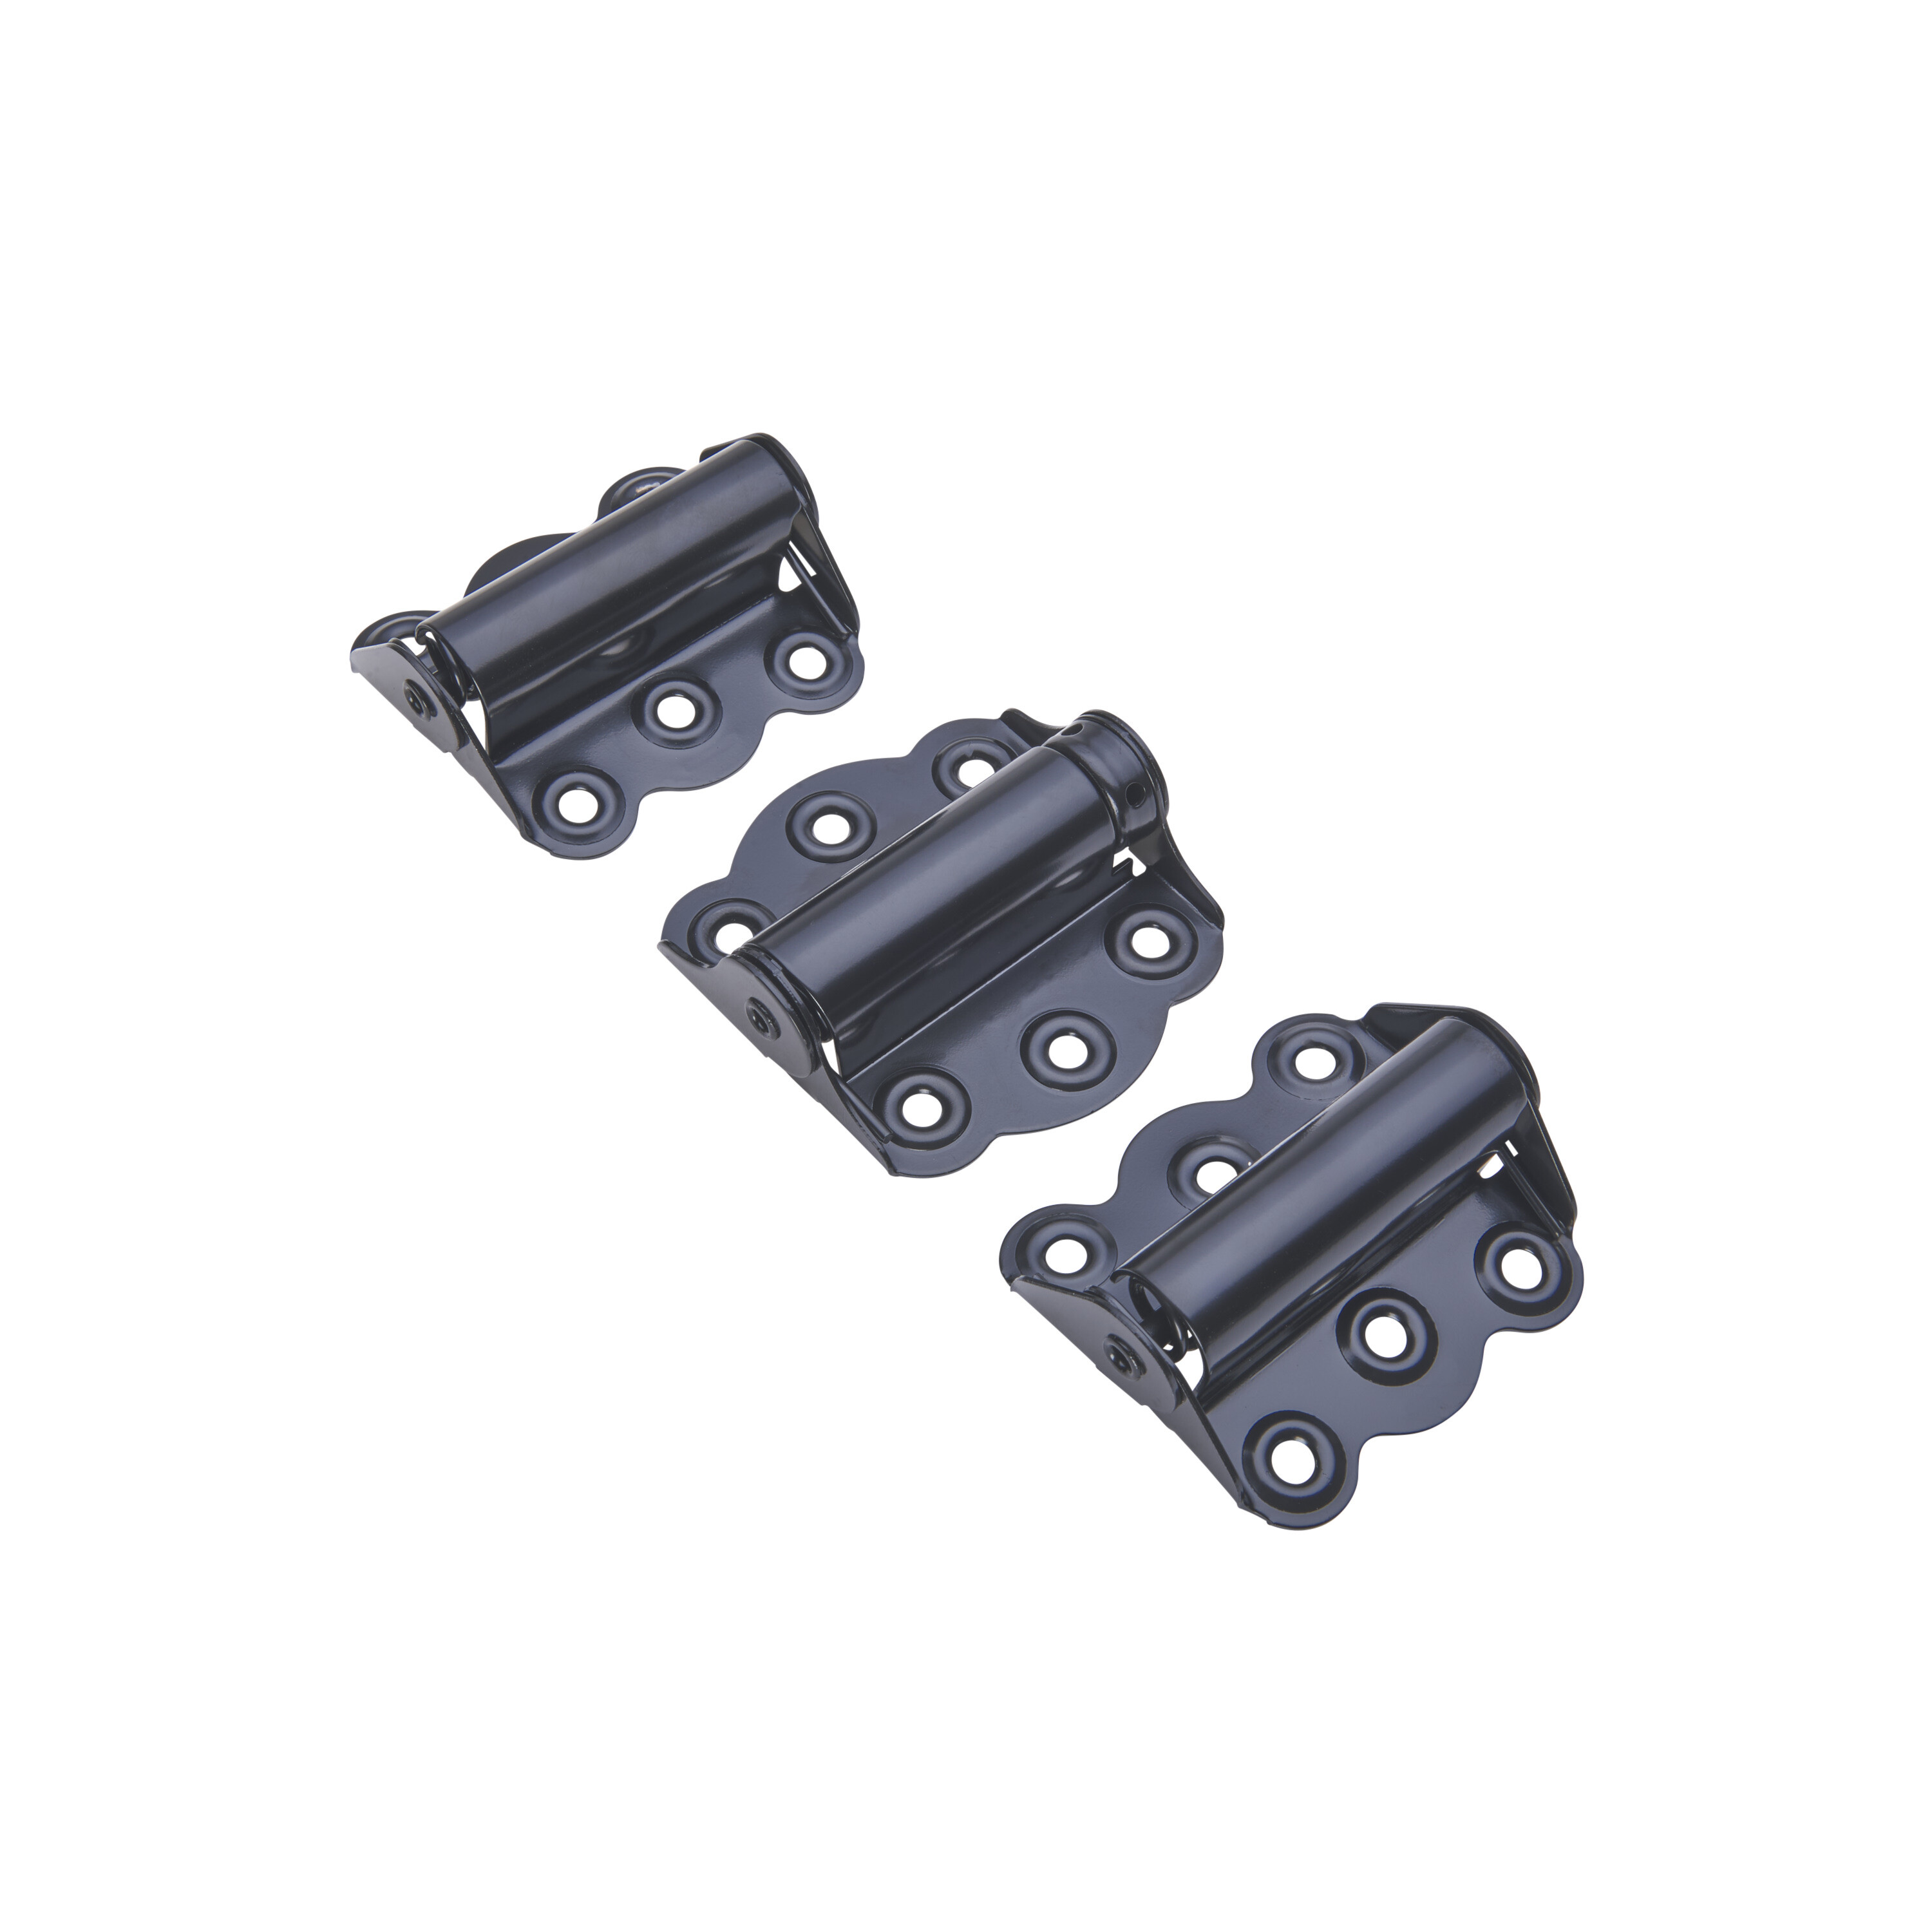 Wright Products 2 3/4" Adjustable & Self Closing Door Hinges - Set of  2 Self Closing Hinges and 1 Adjustable Self Closing Hinge, Black V226BL -  The Home Depot